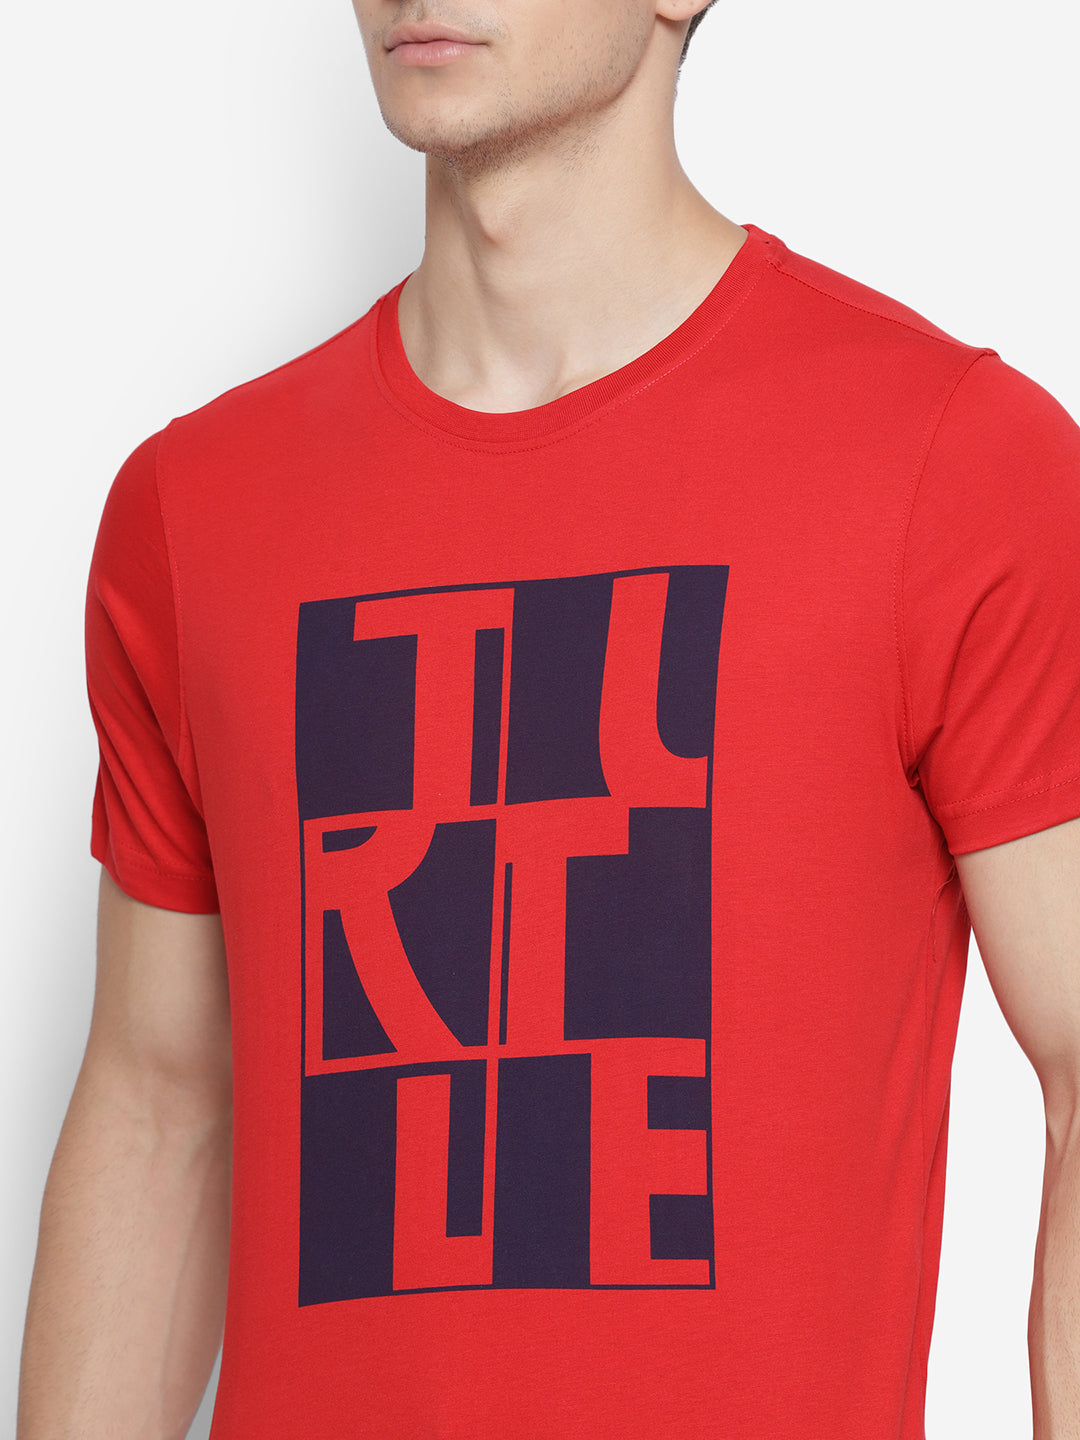 Crew Neck Chest Graphic Red Men T-Shirt